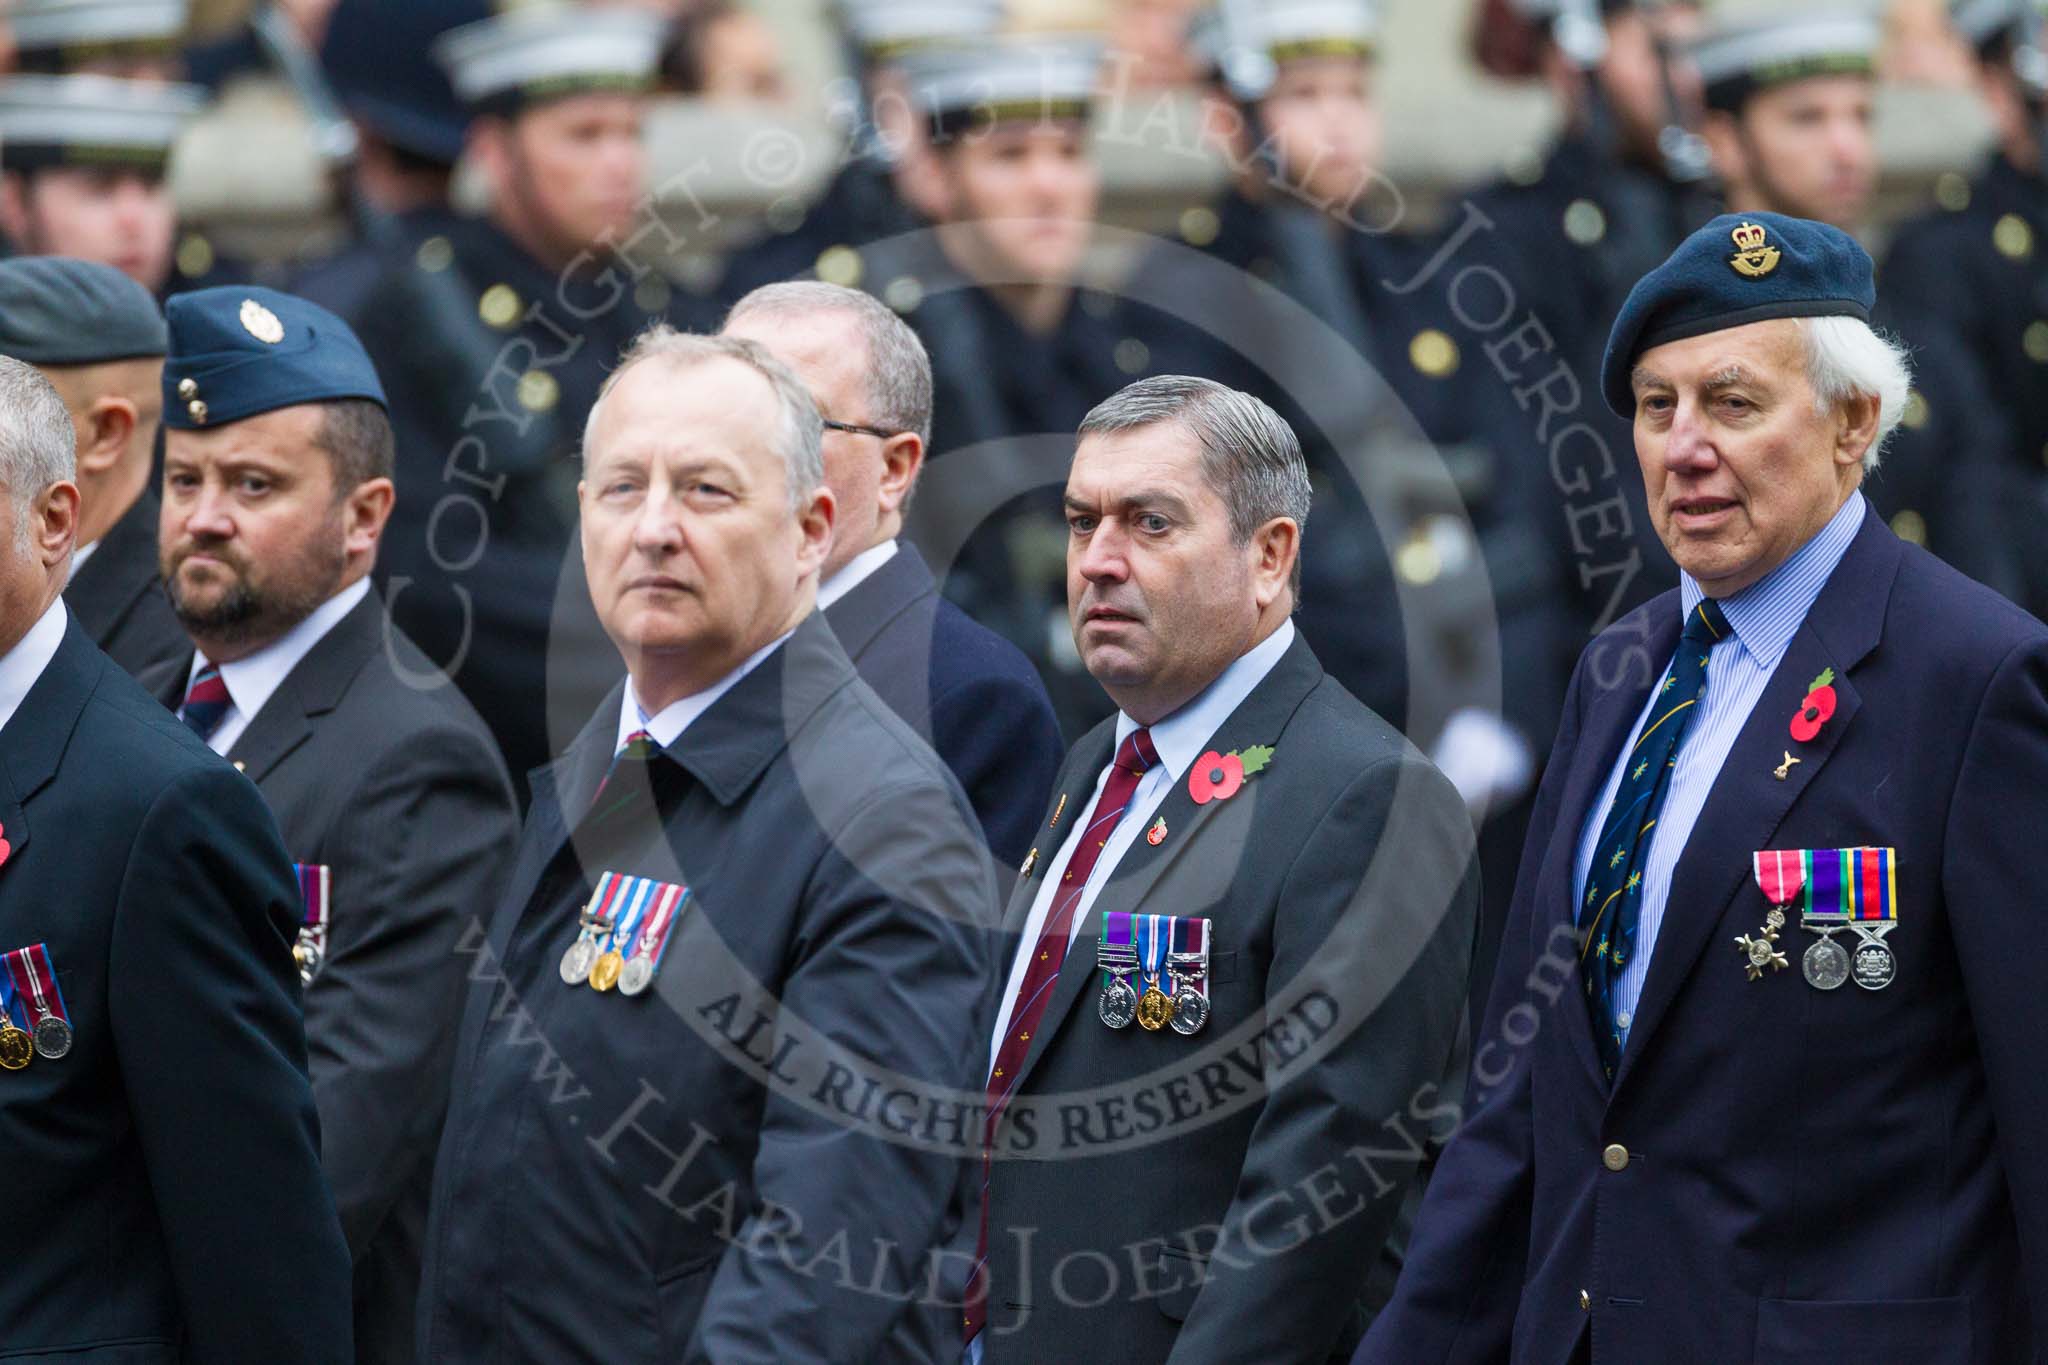 Remembrance Sunday at the Cenotaph 2015: Group C17, Royal Air Force Movements and Mobile Air Movements Squadron Association (RAF MAMS) (New for 2015).
Cenotaph, Whitehall, London SW1,
London,
Greater London,
United Kingdom,
on 08 November 2015 at 11:49, image #524